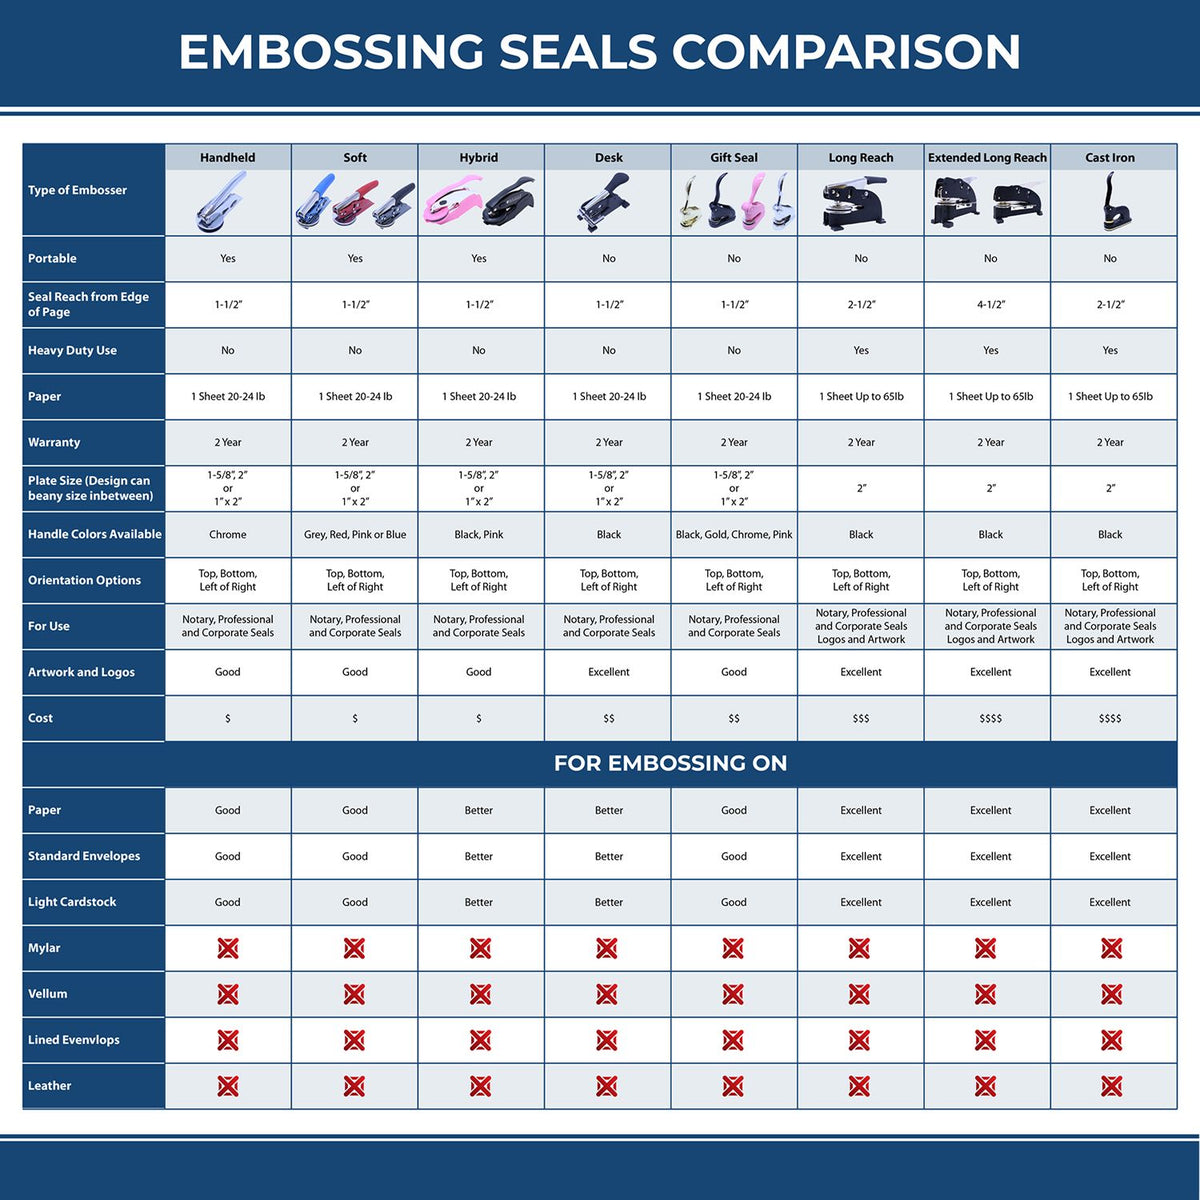 A comparison chart for the different types of mount models available for the State of Pennsylvania Soft Land Surveyor Embossing Seal.